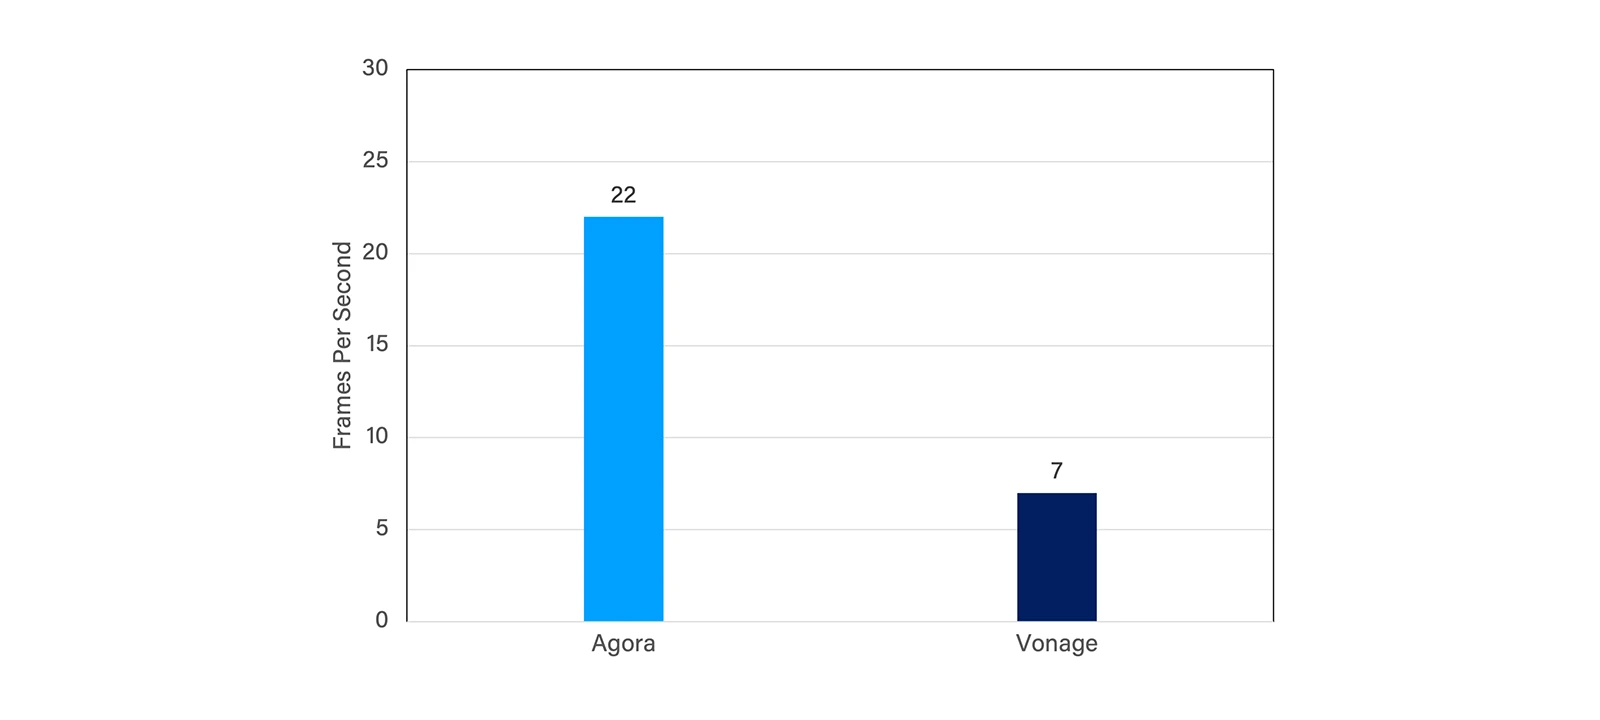 Figure 5: FPS comparison for Agora and Vonage with network having downlink 600ms jitter.